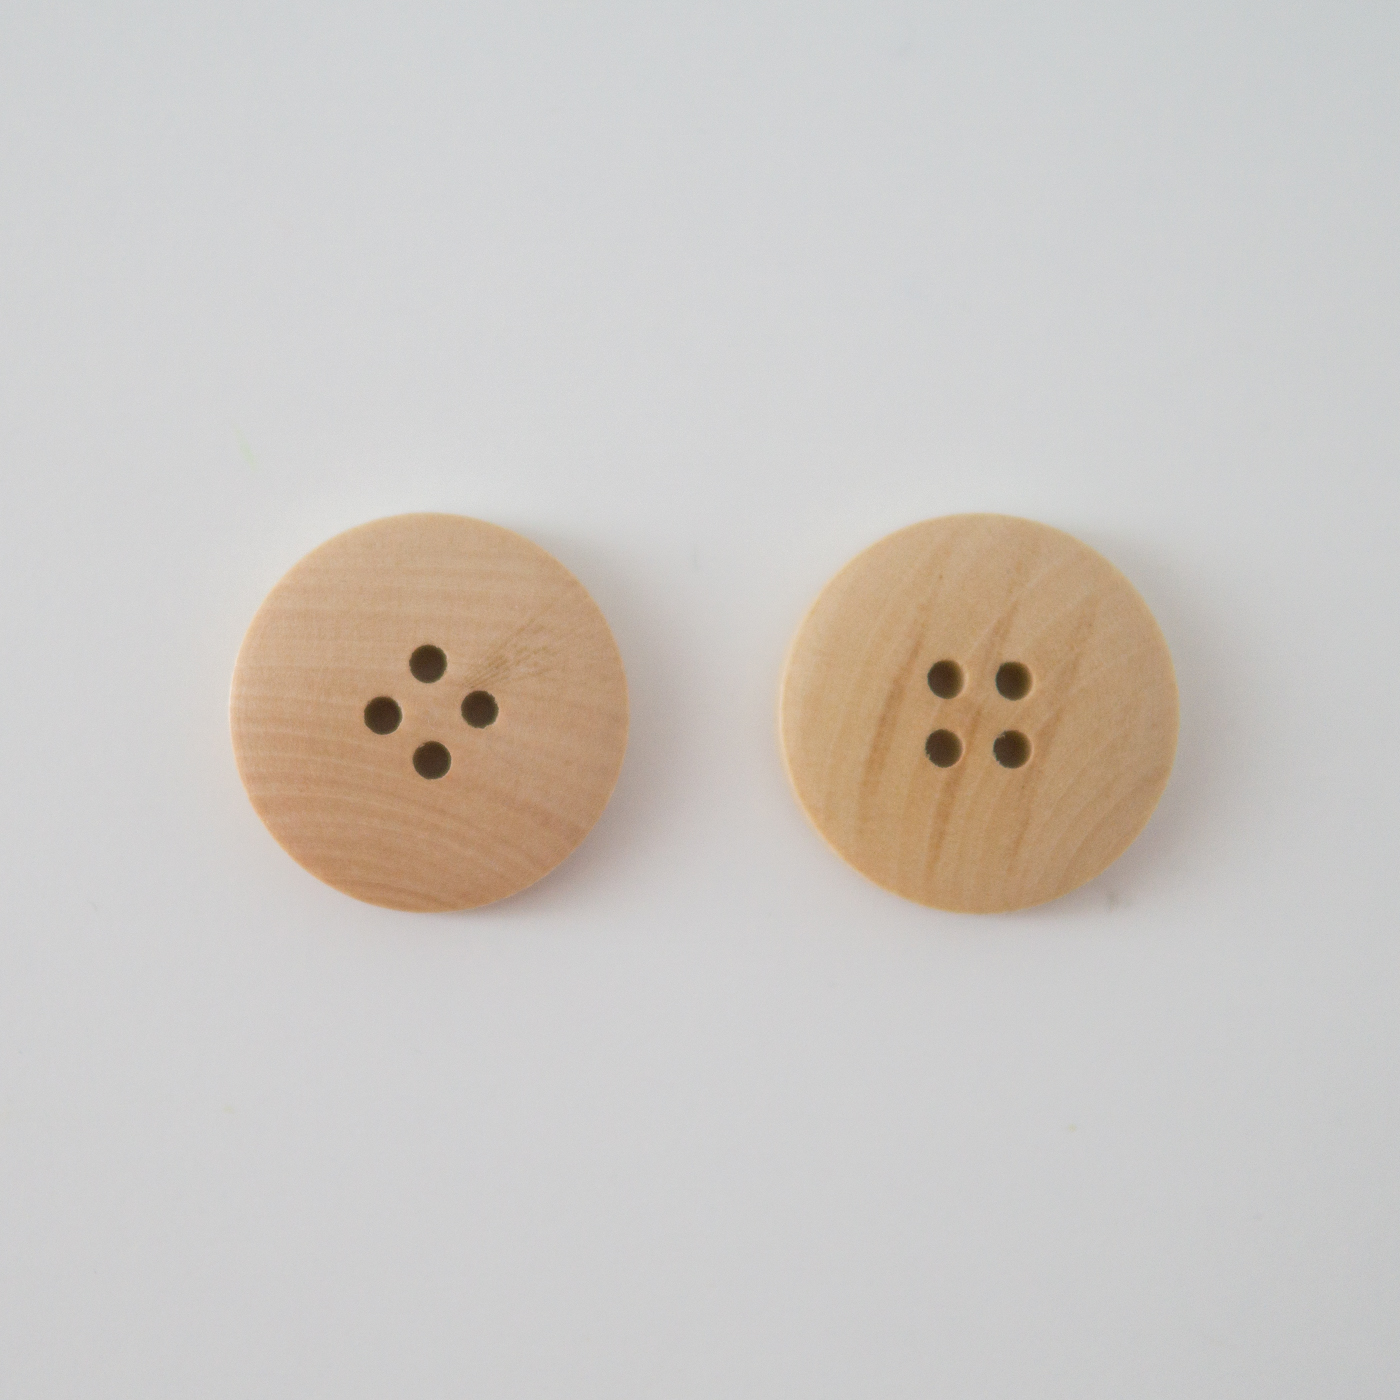 wood button - Wooden button | Natural light wood button knitting - by HipKnitShop - 16/10/2018